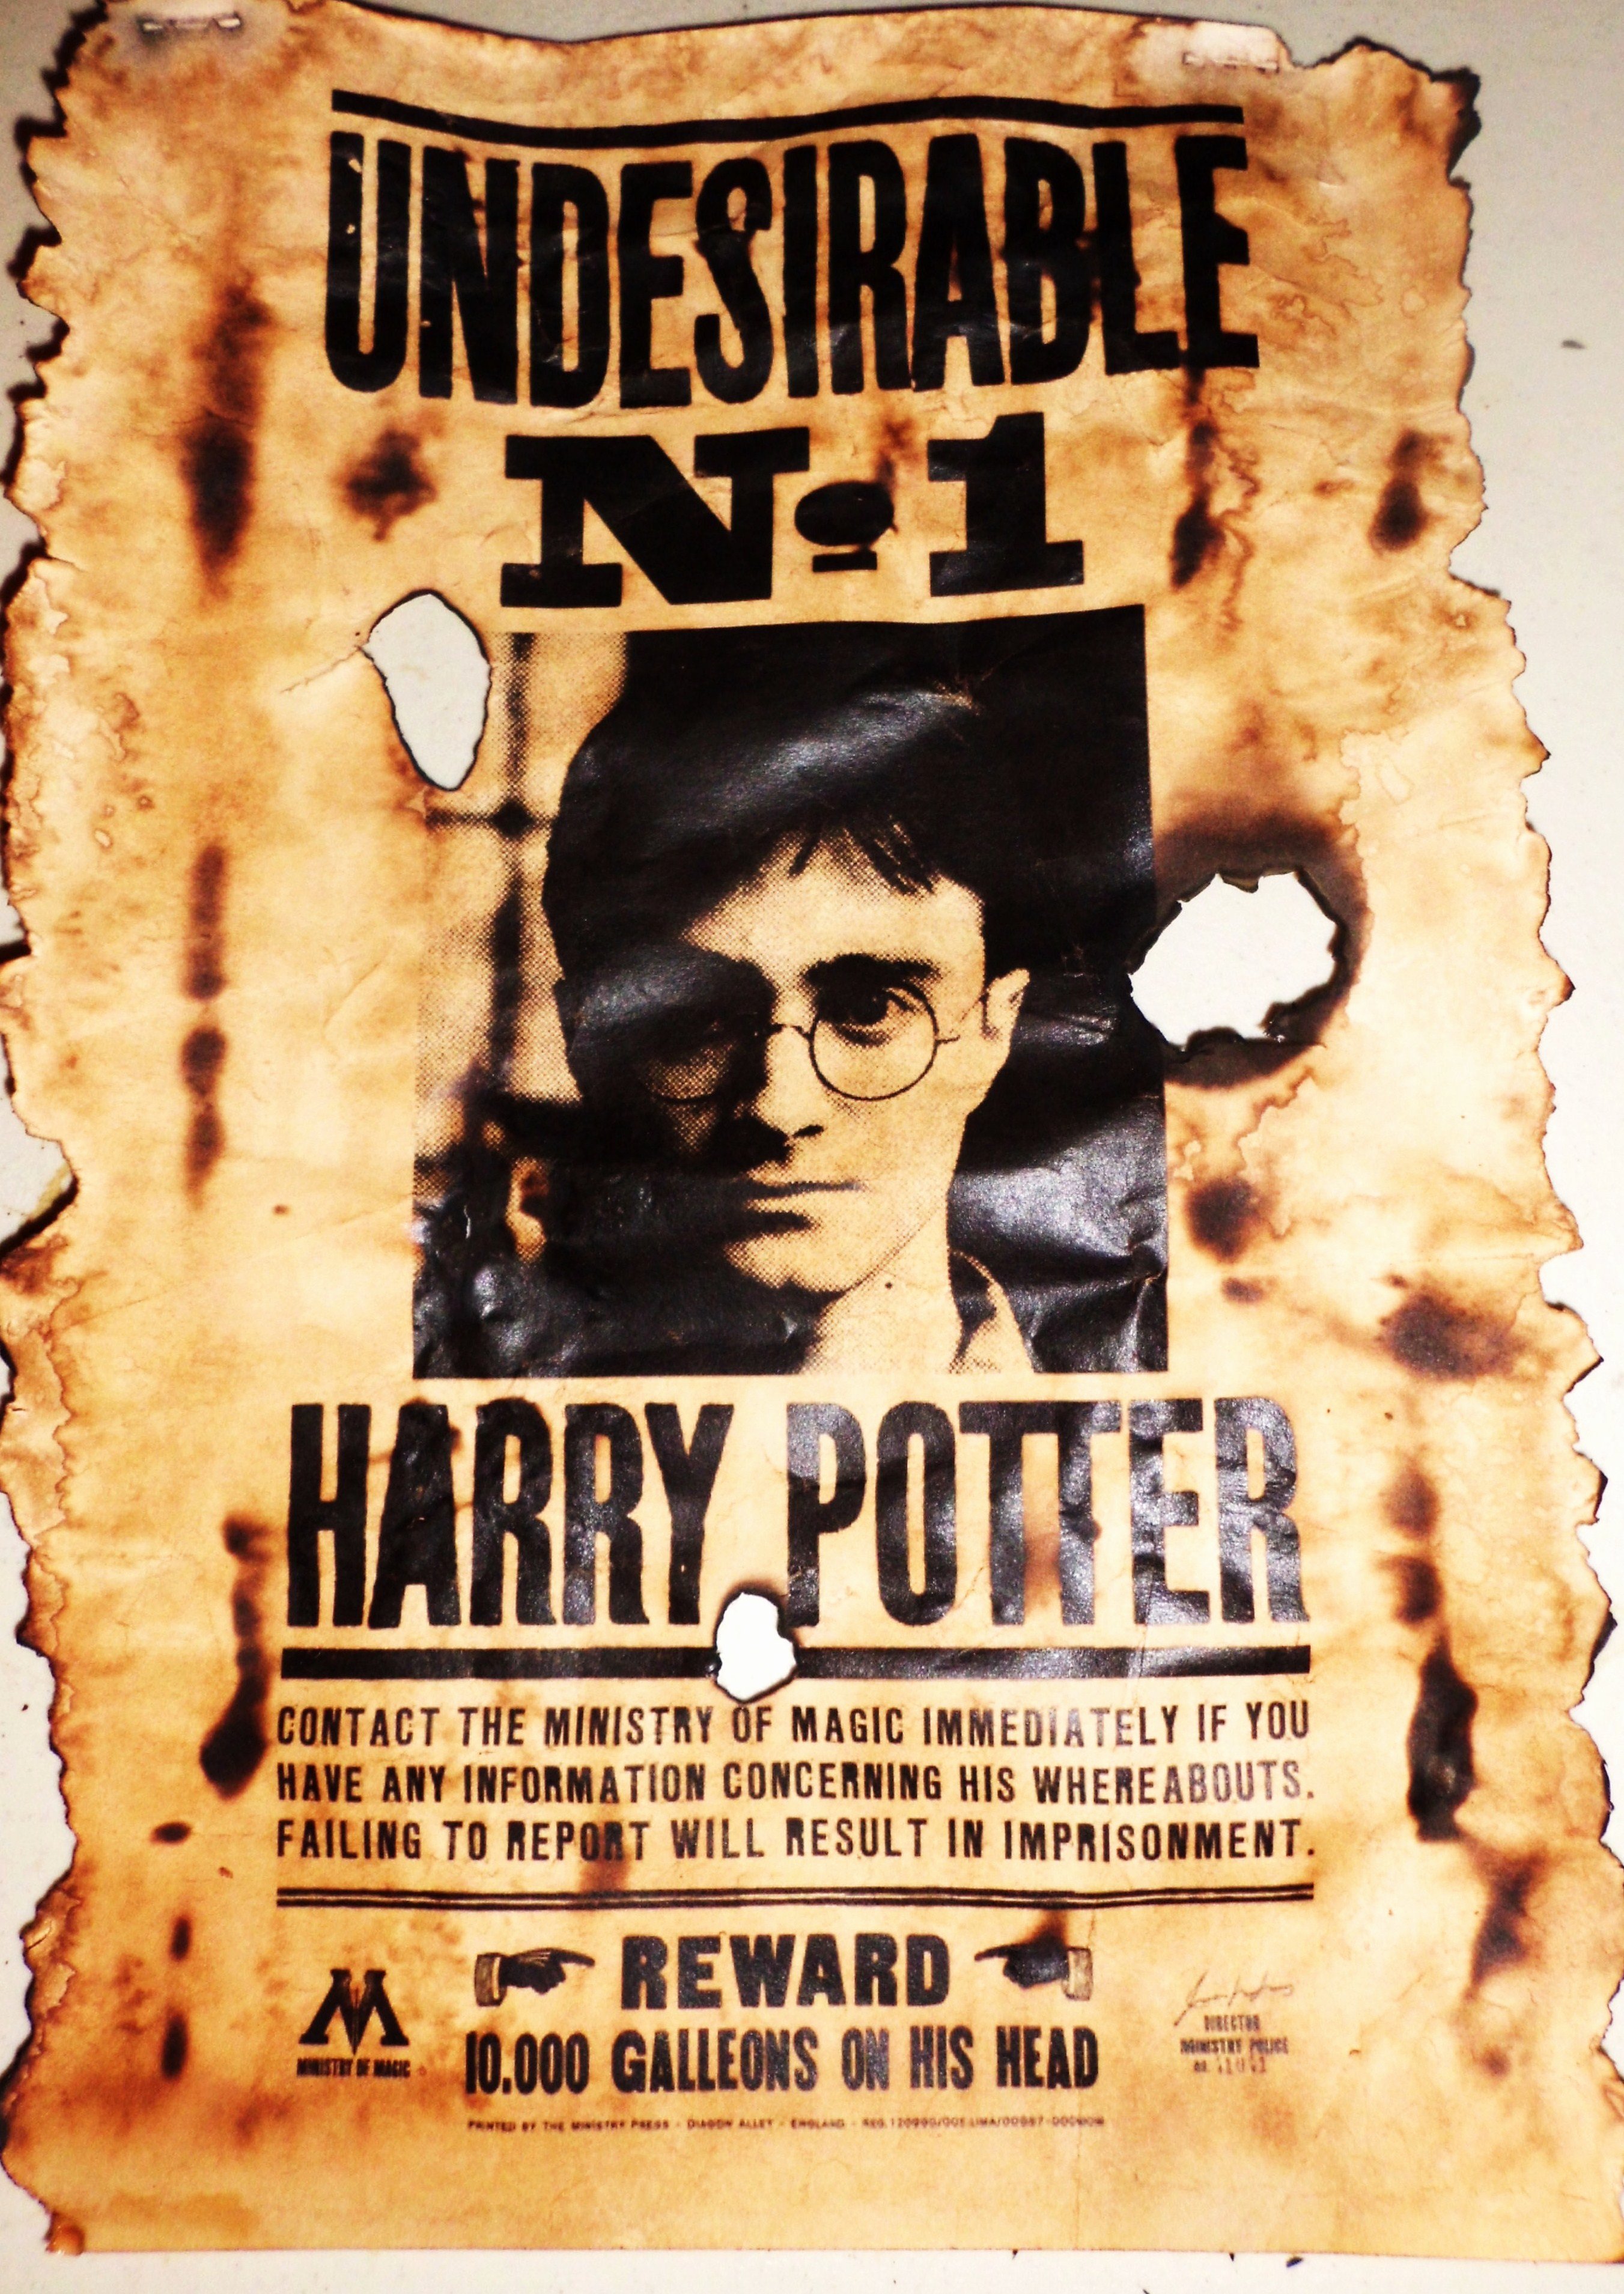 Harry Potter Wanted Poster New Harry Potter &amp; Sirius Black Wanted Posters 6x11 On Storenvy